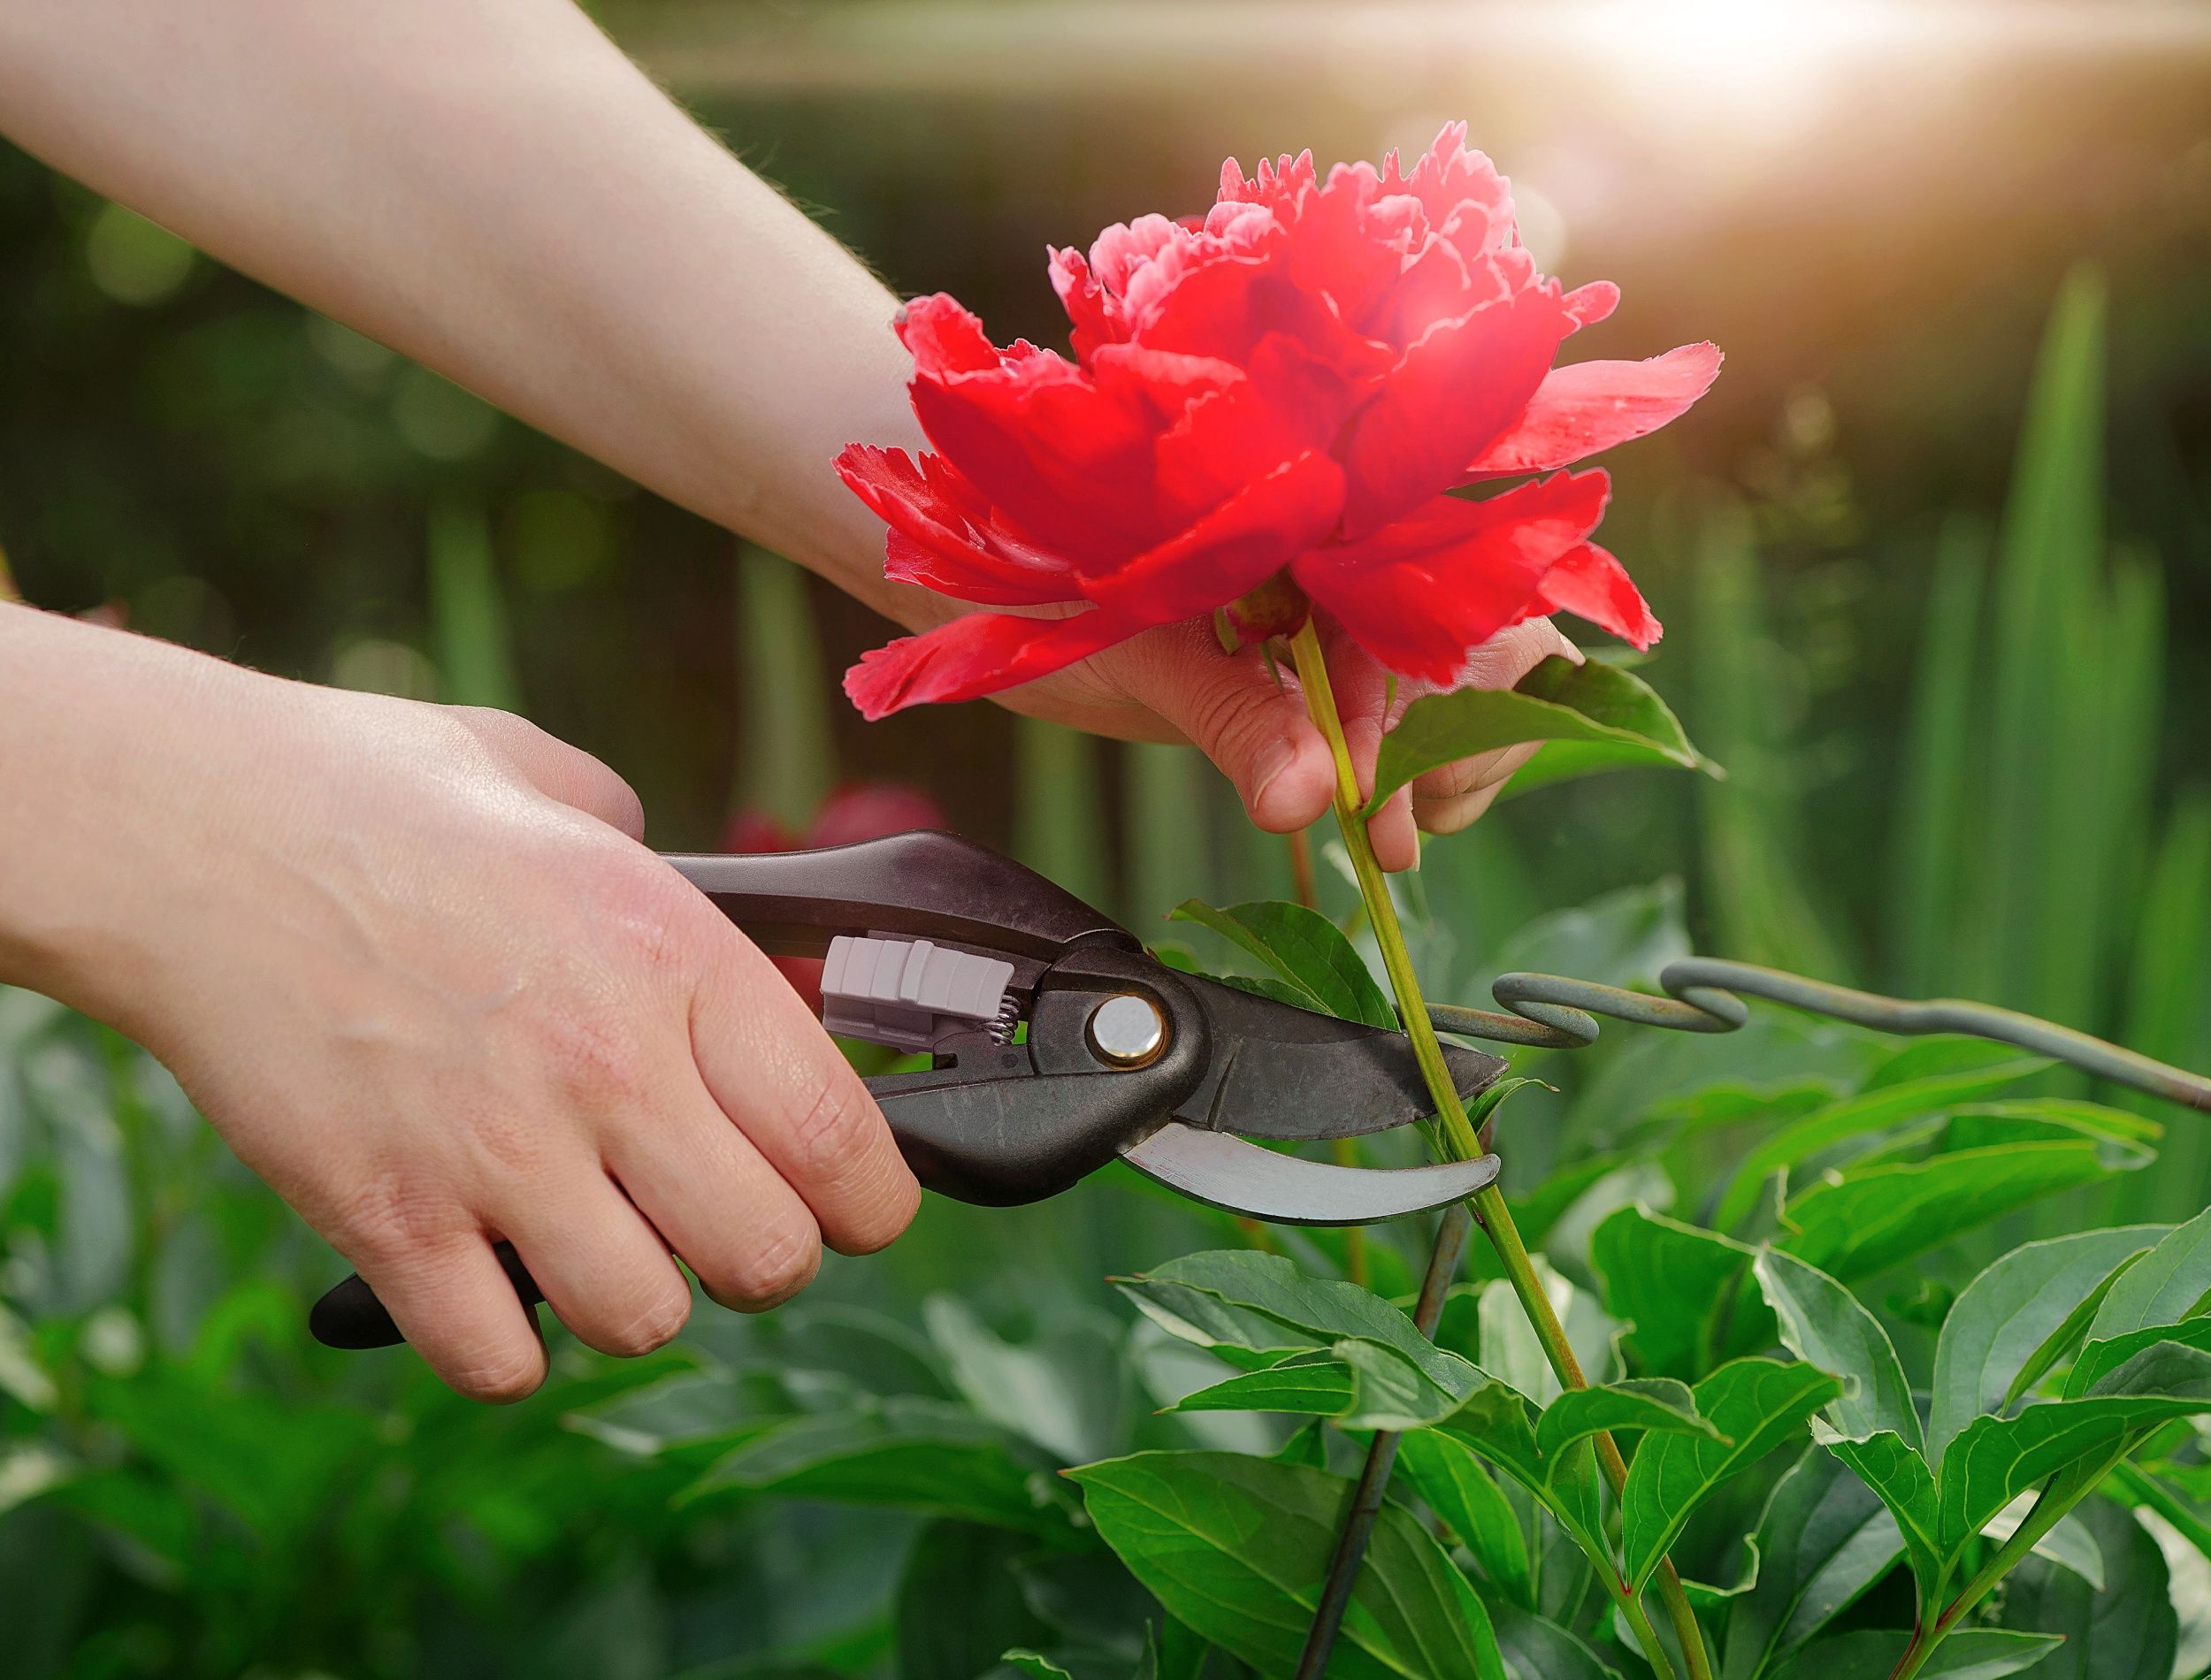 A woman gardener picks a large, beautiful red peony in the summer garden with a pair of pruning shears. Collecting cut flowers